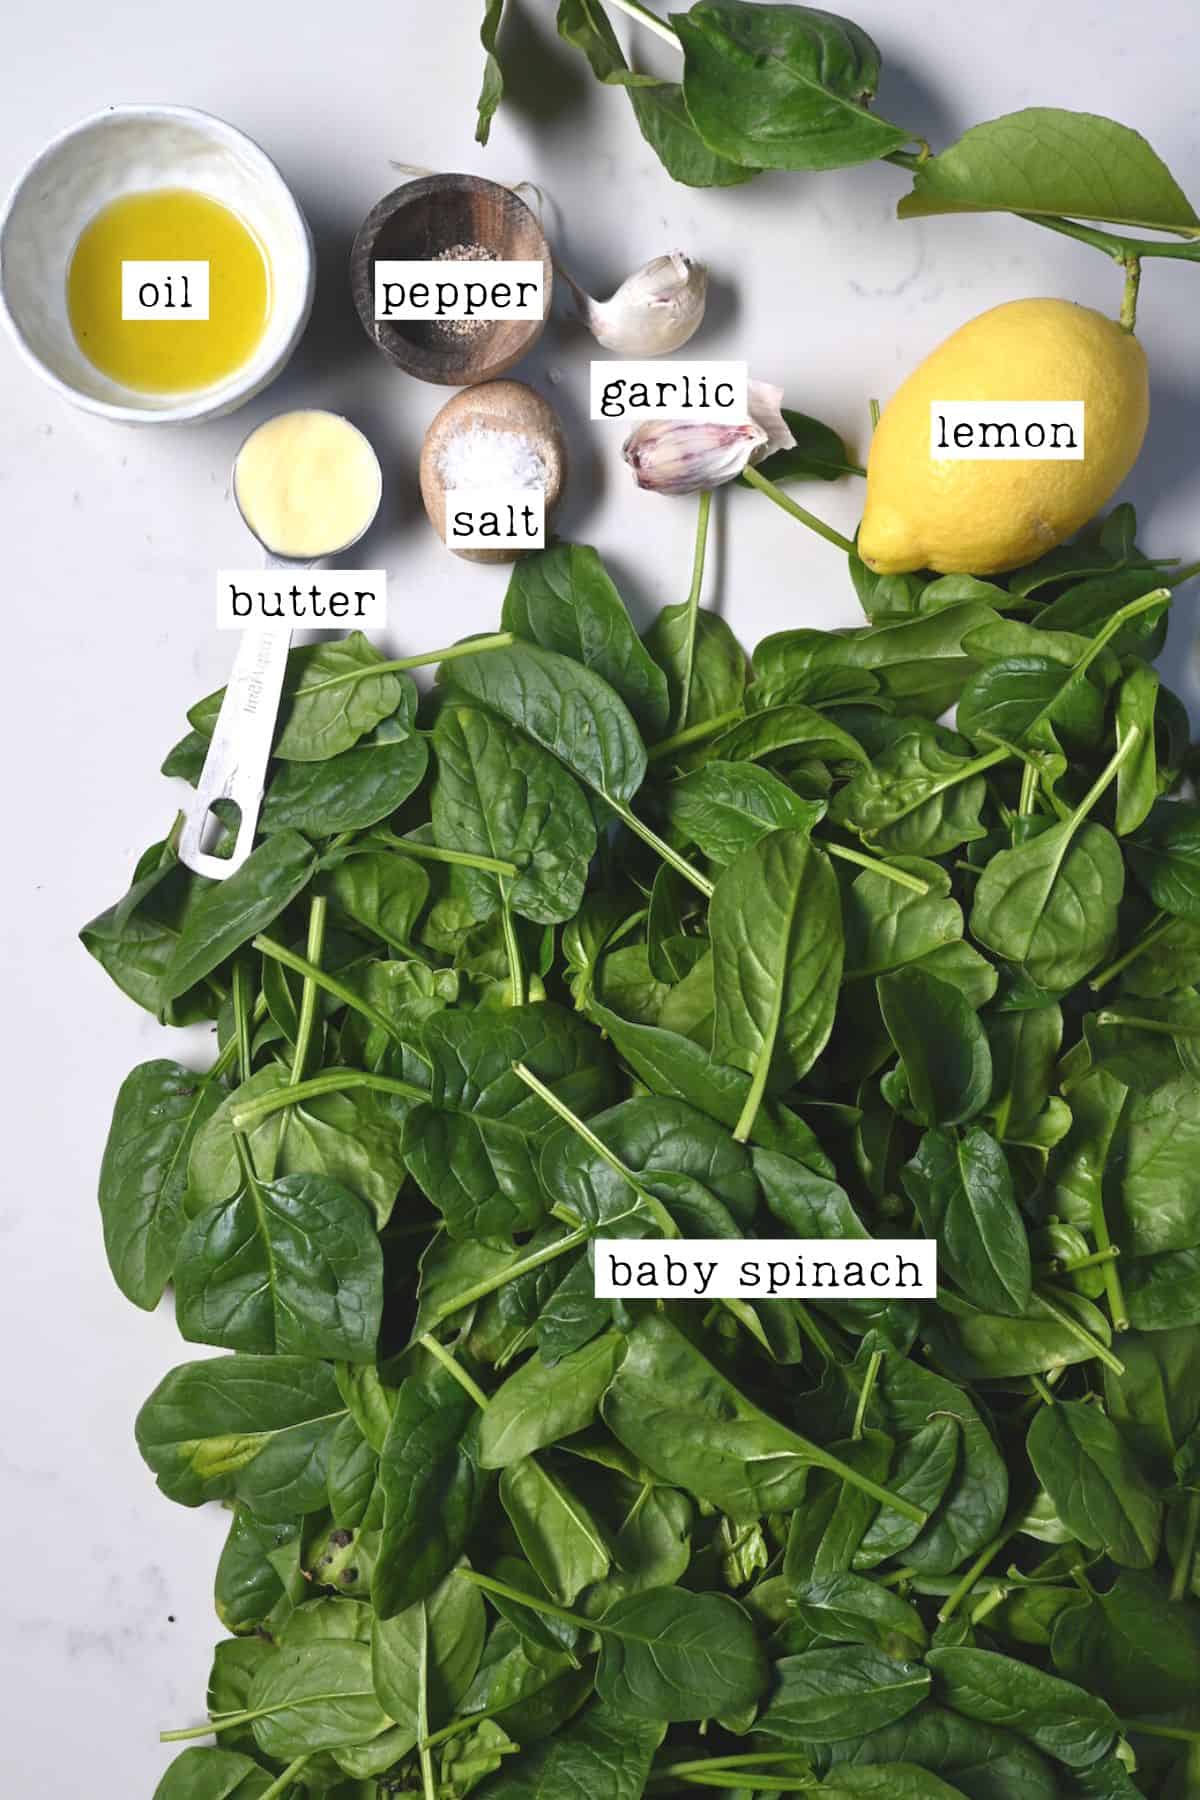 Ingredients for sauteed spinach